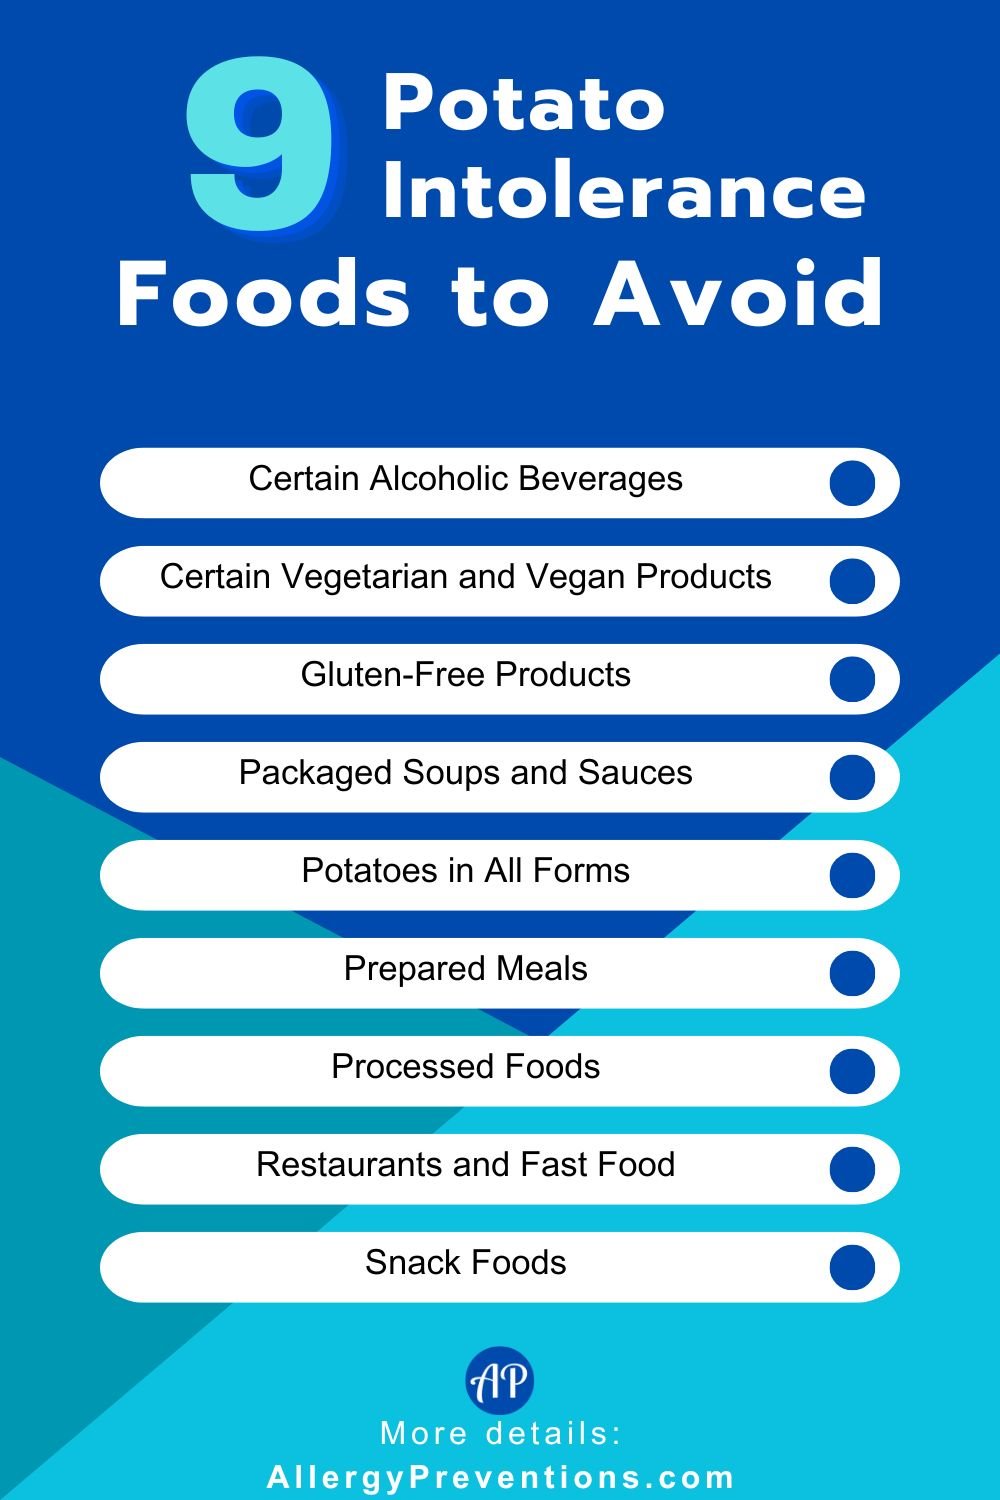 9 potato intolerance foods to avoid infographic: Certain Alcoholic Beverages, Certain Vegetarian and Vegan Products, Gluten-Free Products, Packaged Soups and Sauces, Potatoes in All Forms, Prepared Meals, Processed Foods, Restaurants and Fast Food, and Snack Foods.